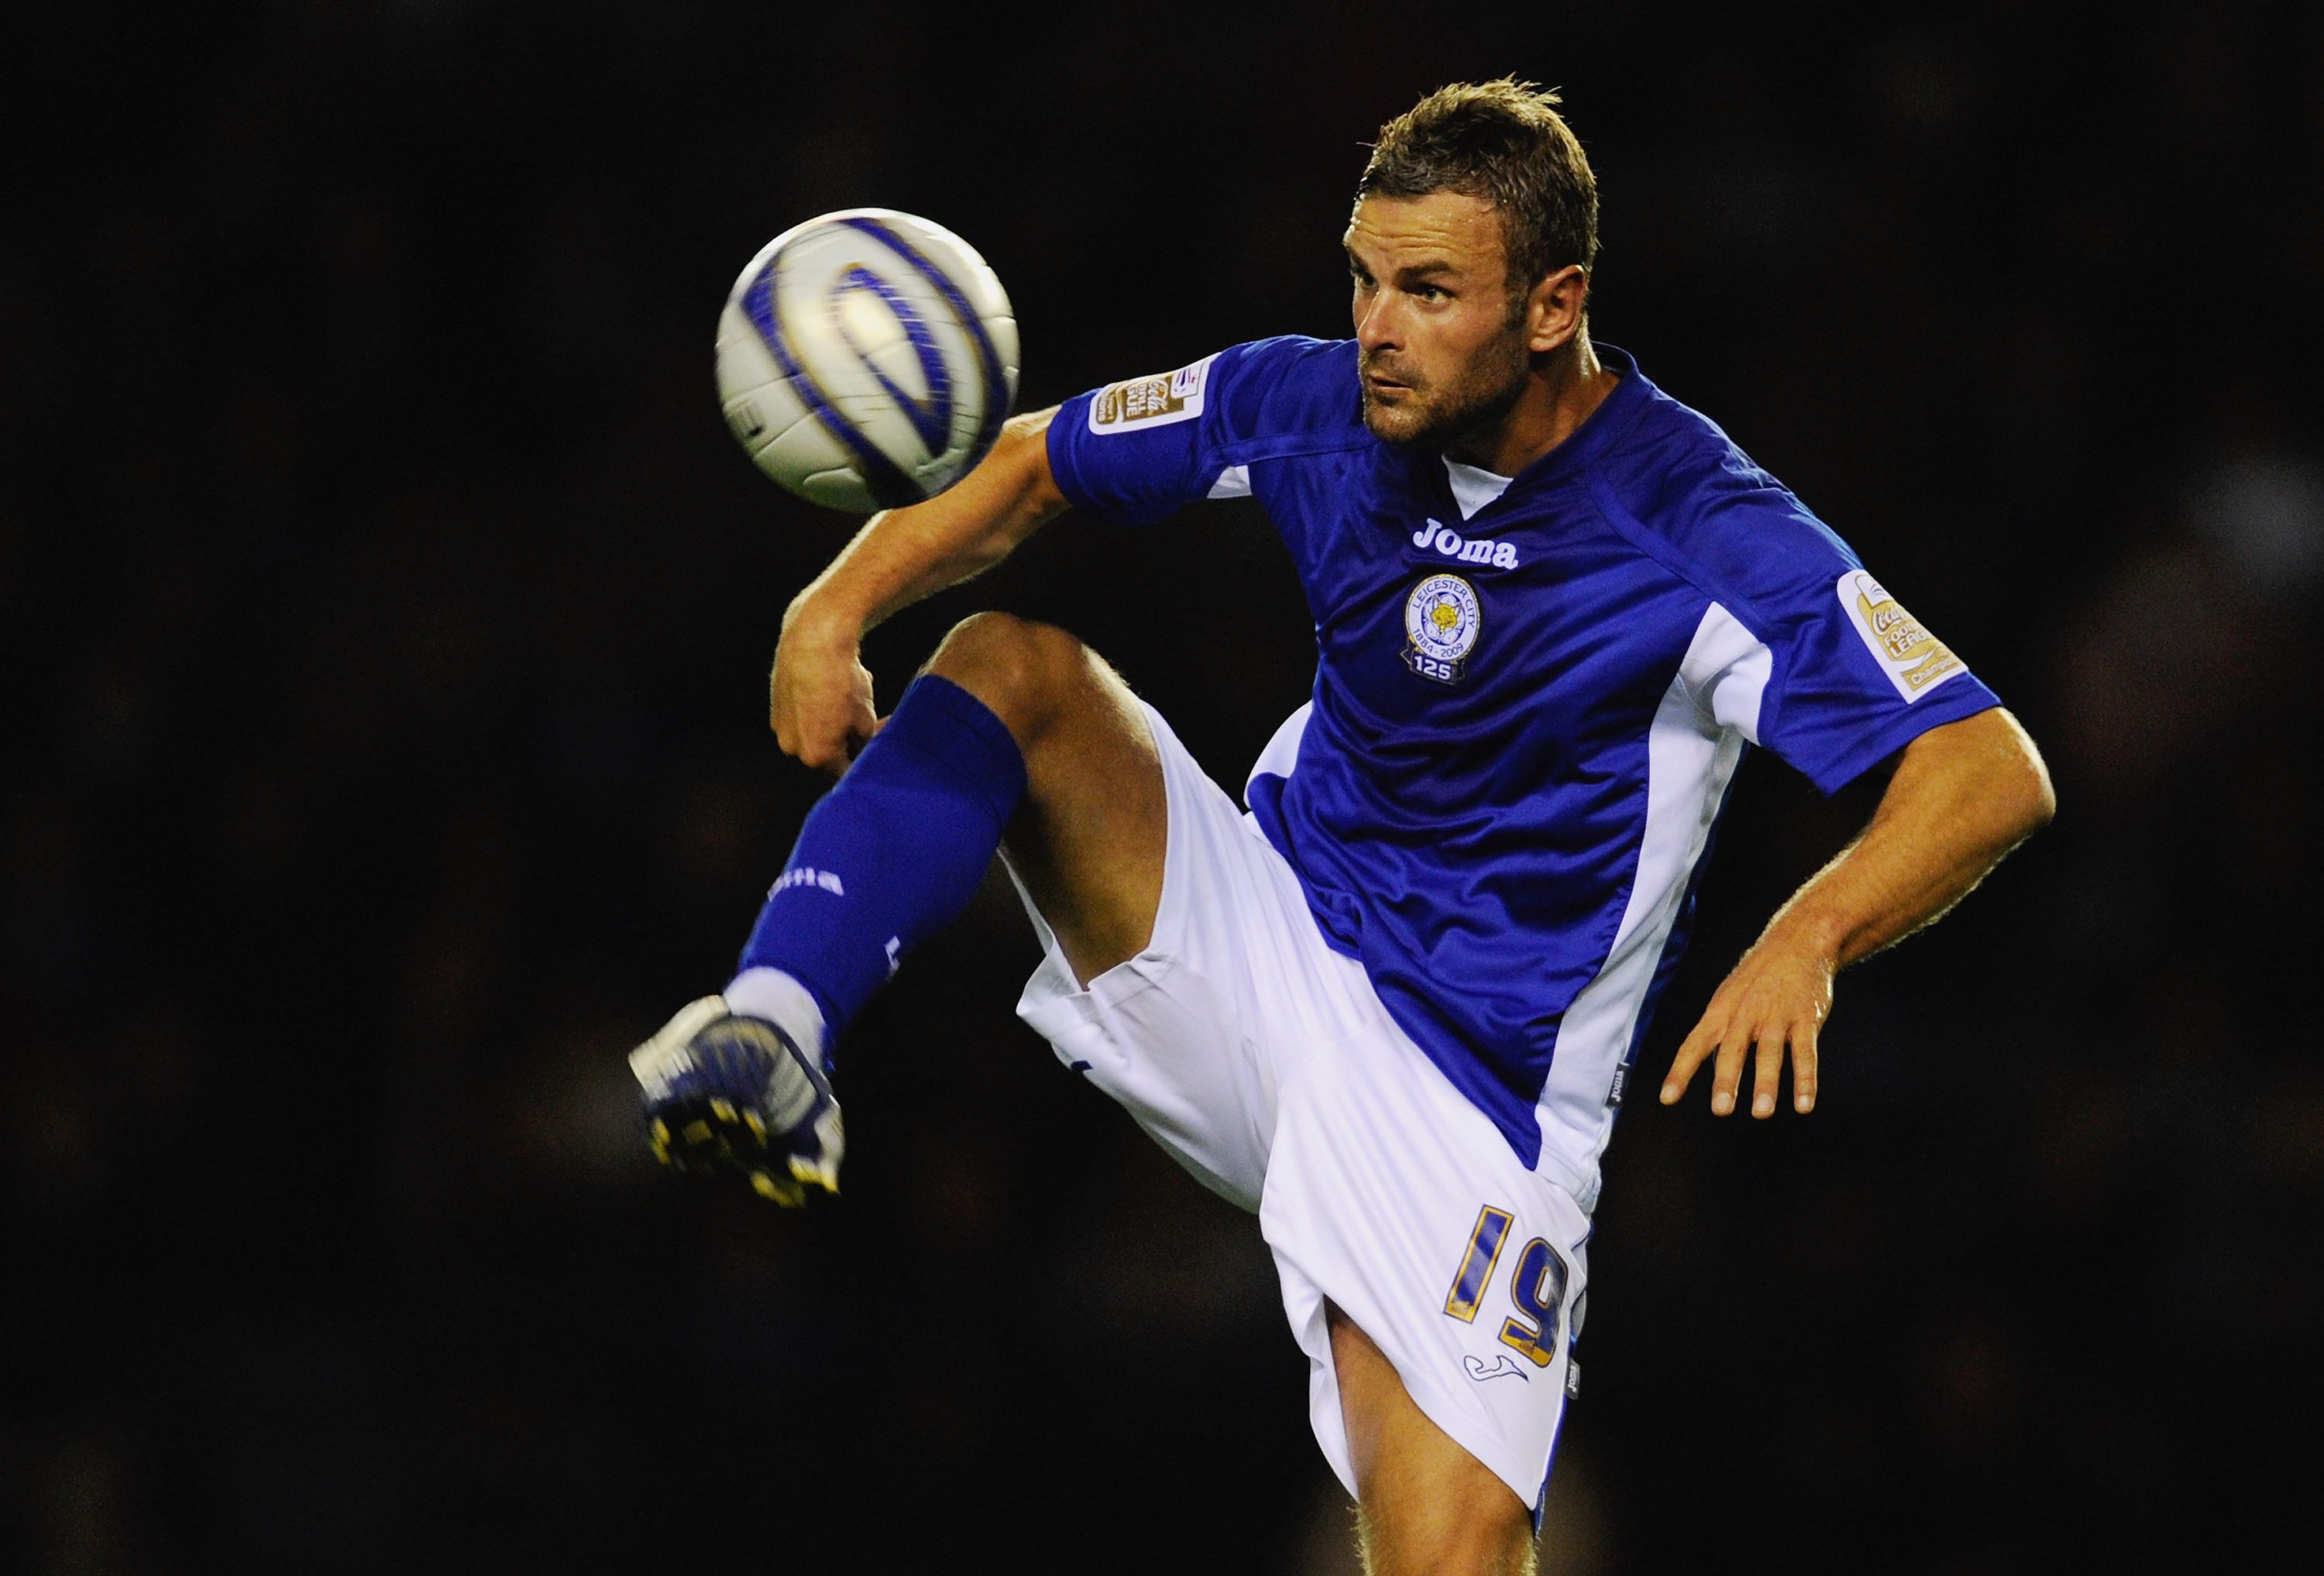 Leicester's 2009/10 kit looked like a school PE kit